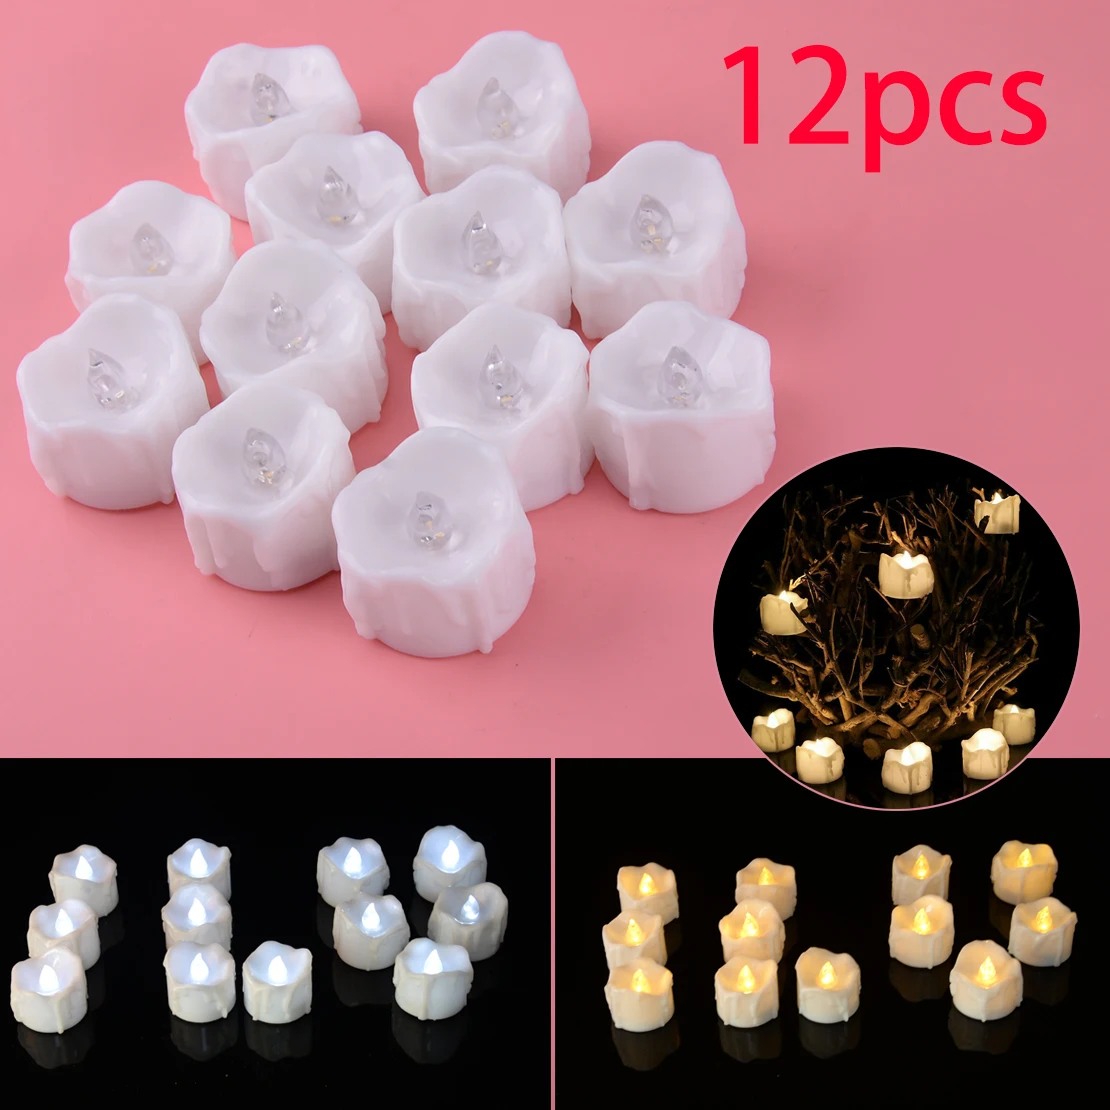 

12Pcs Led Plastic Unscented Flickering Flameless Tea Light Candles For Wedding Part Festival Home